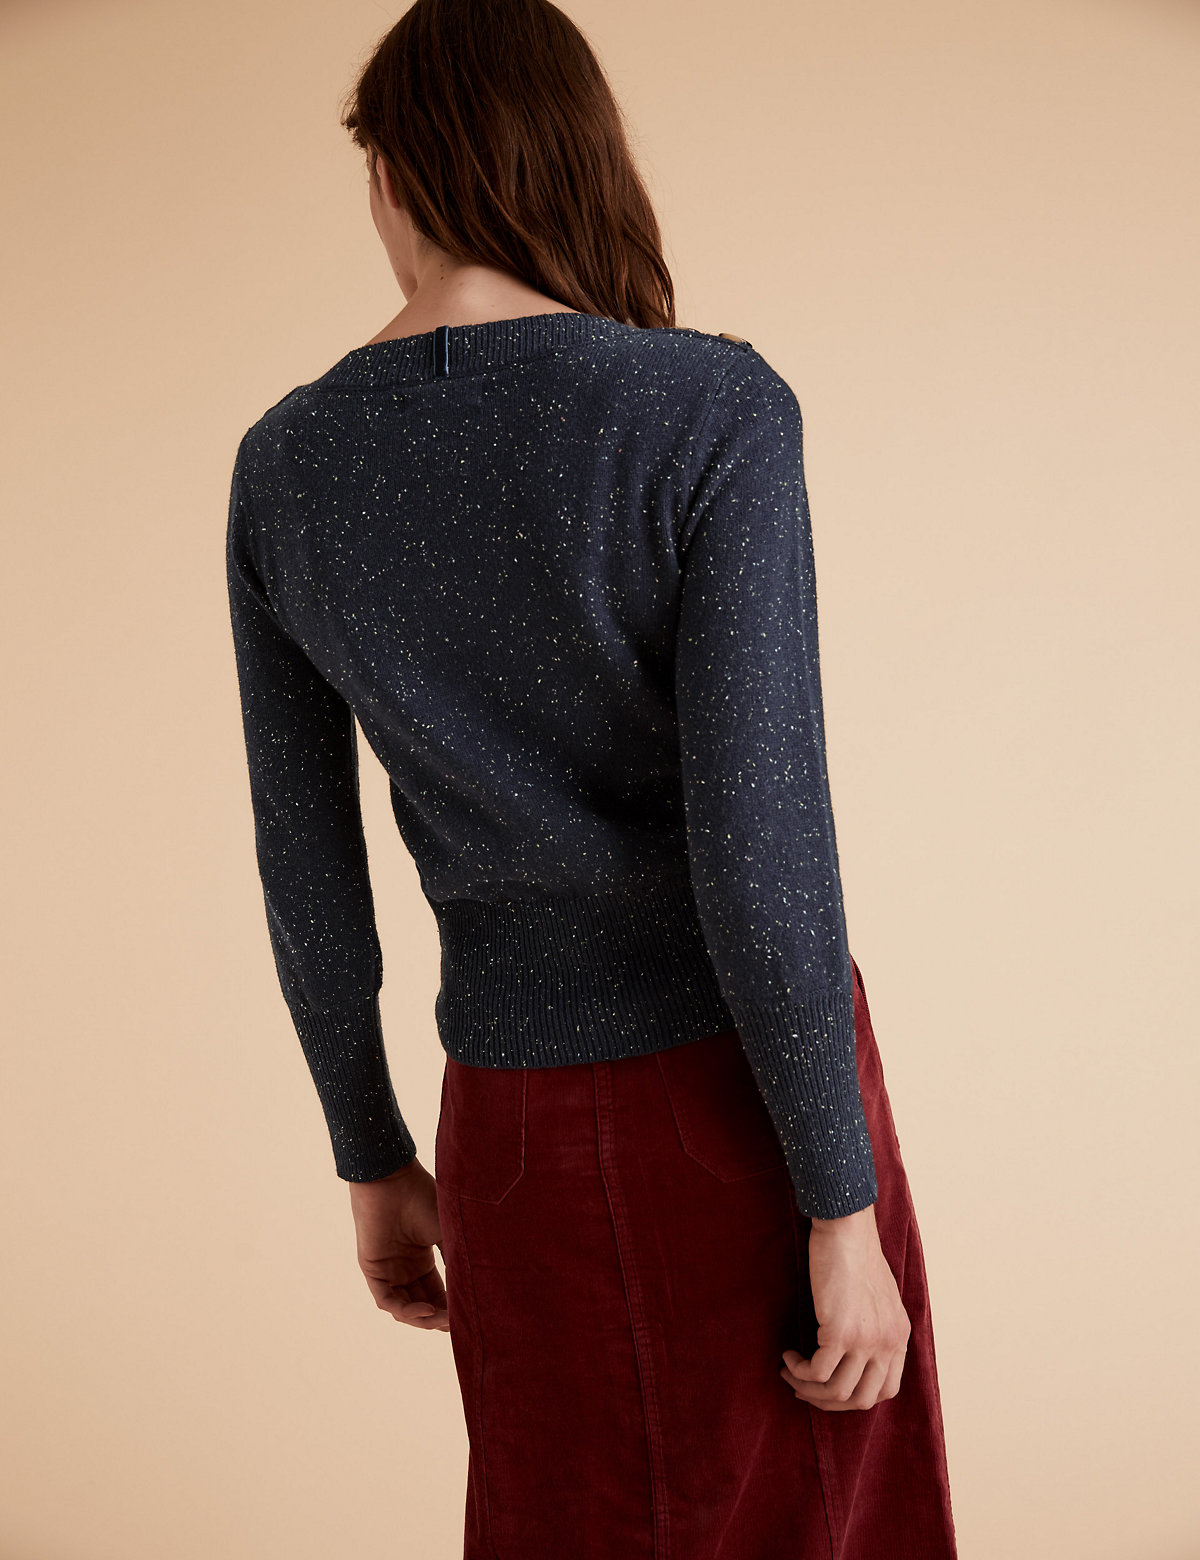 Boat Neck Long Sleeve Jumper with Wool